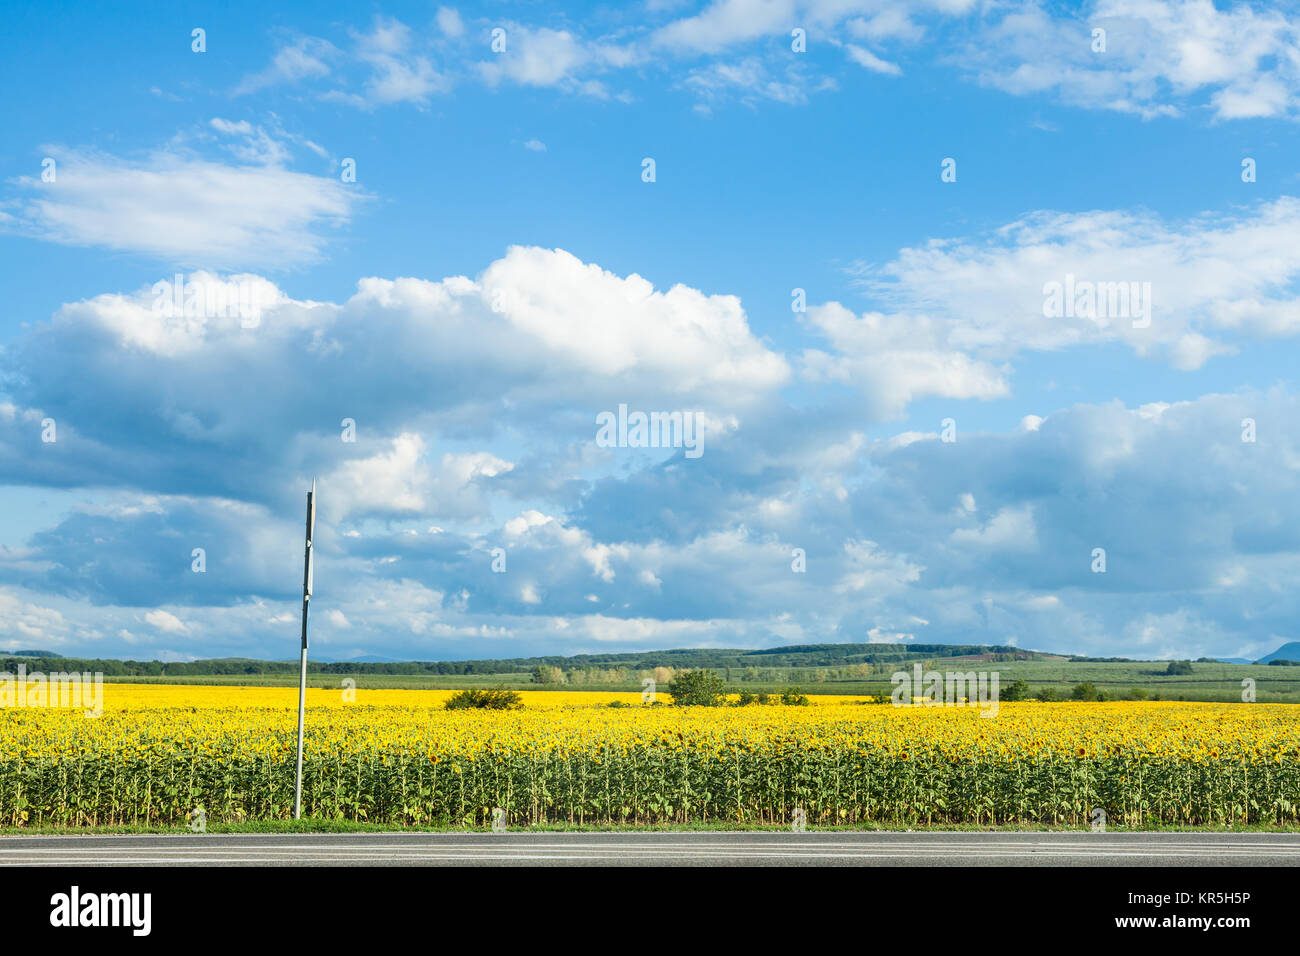 blue sky with white clouds over sunflower field Stock Photo